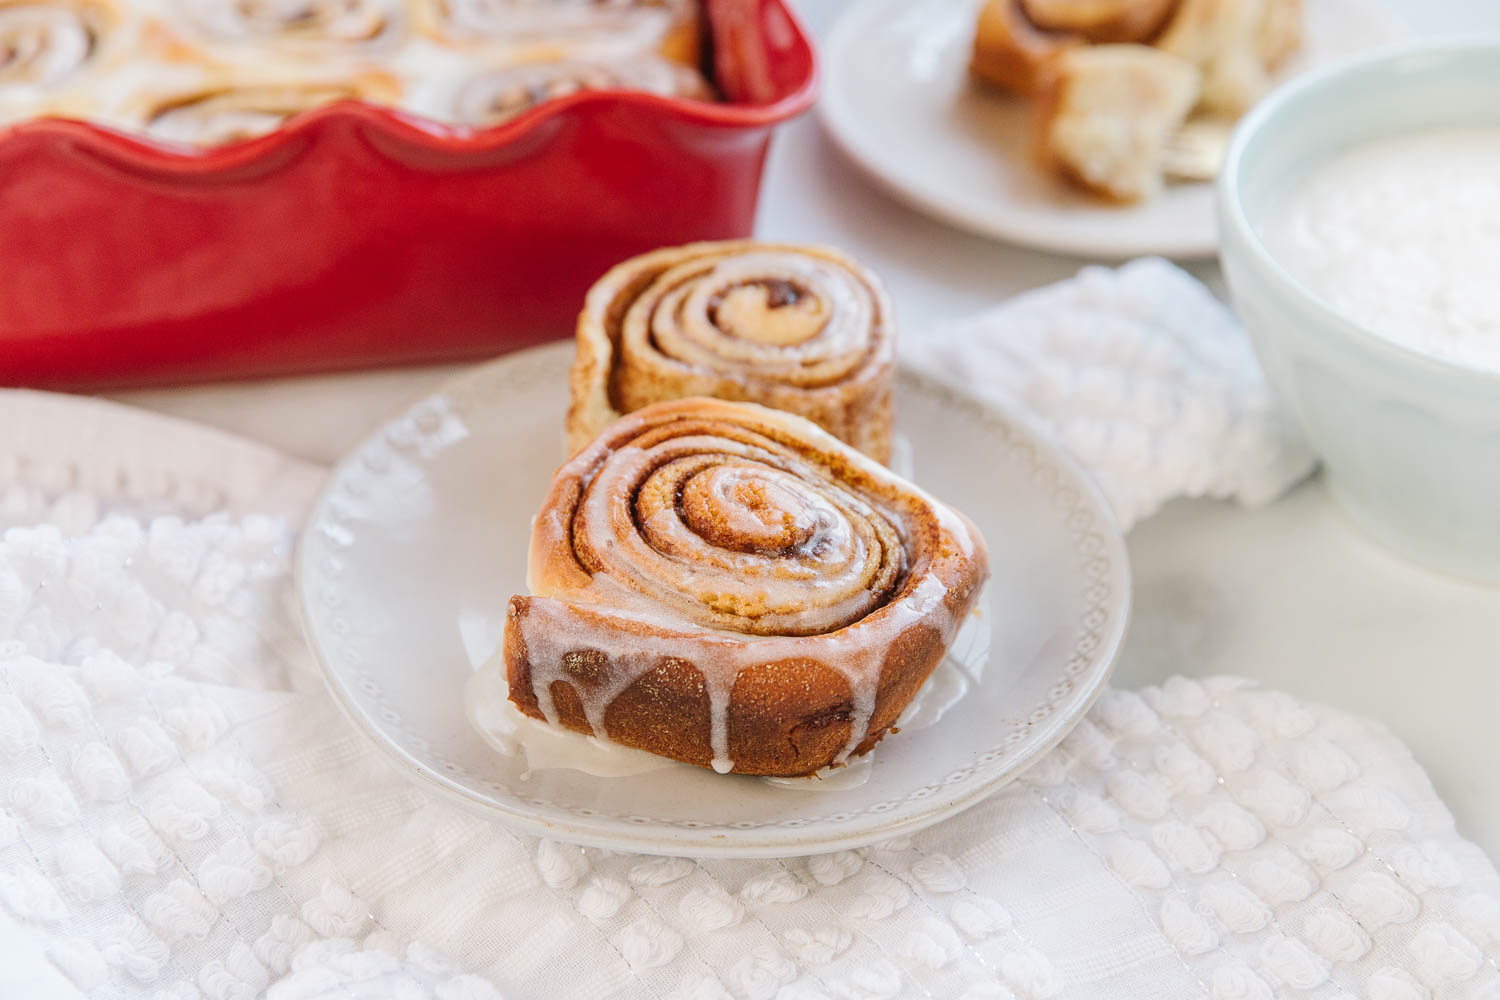 A white plate with two cinnamon rolls with a white bowl of icing, white plate with a cinnamon roll and a red pan of other cinnamon rolls.